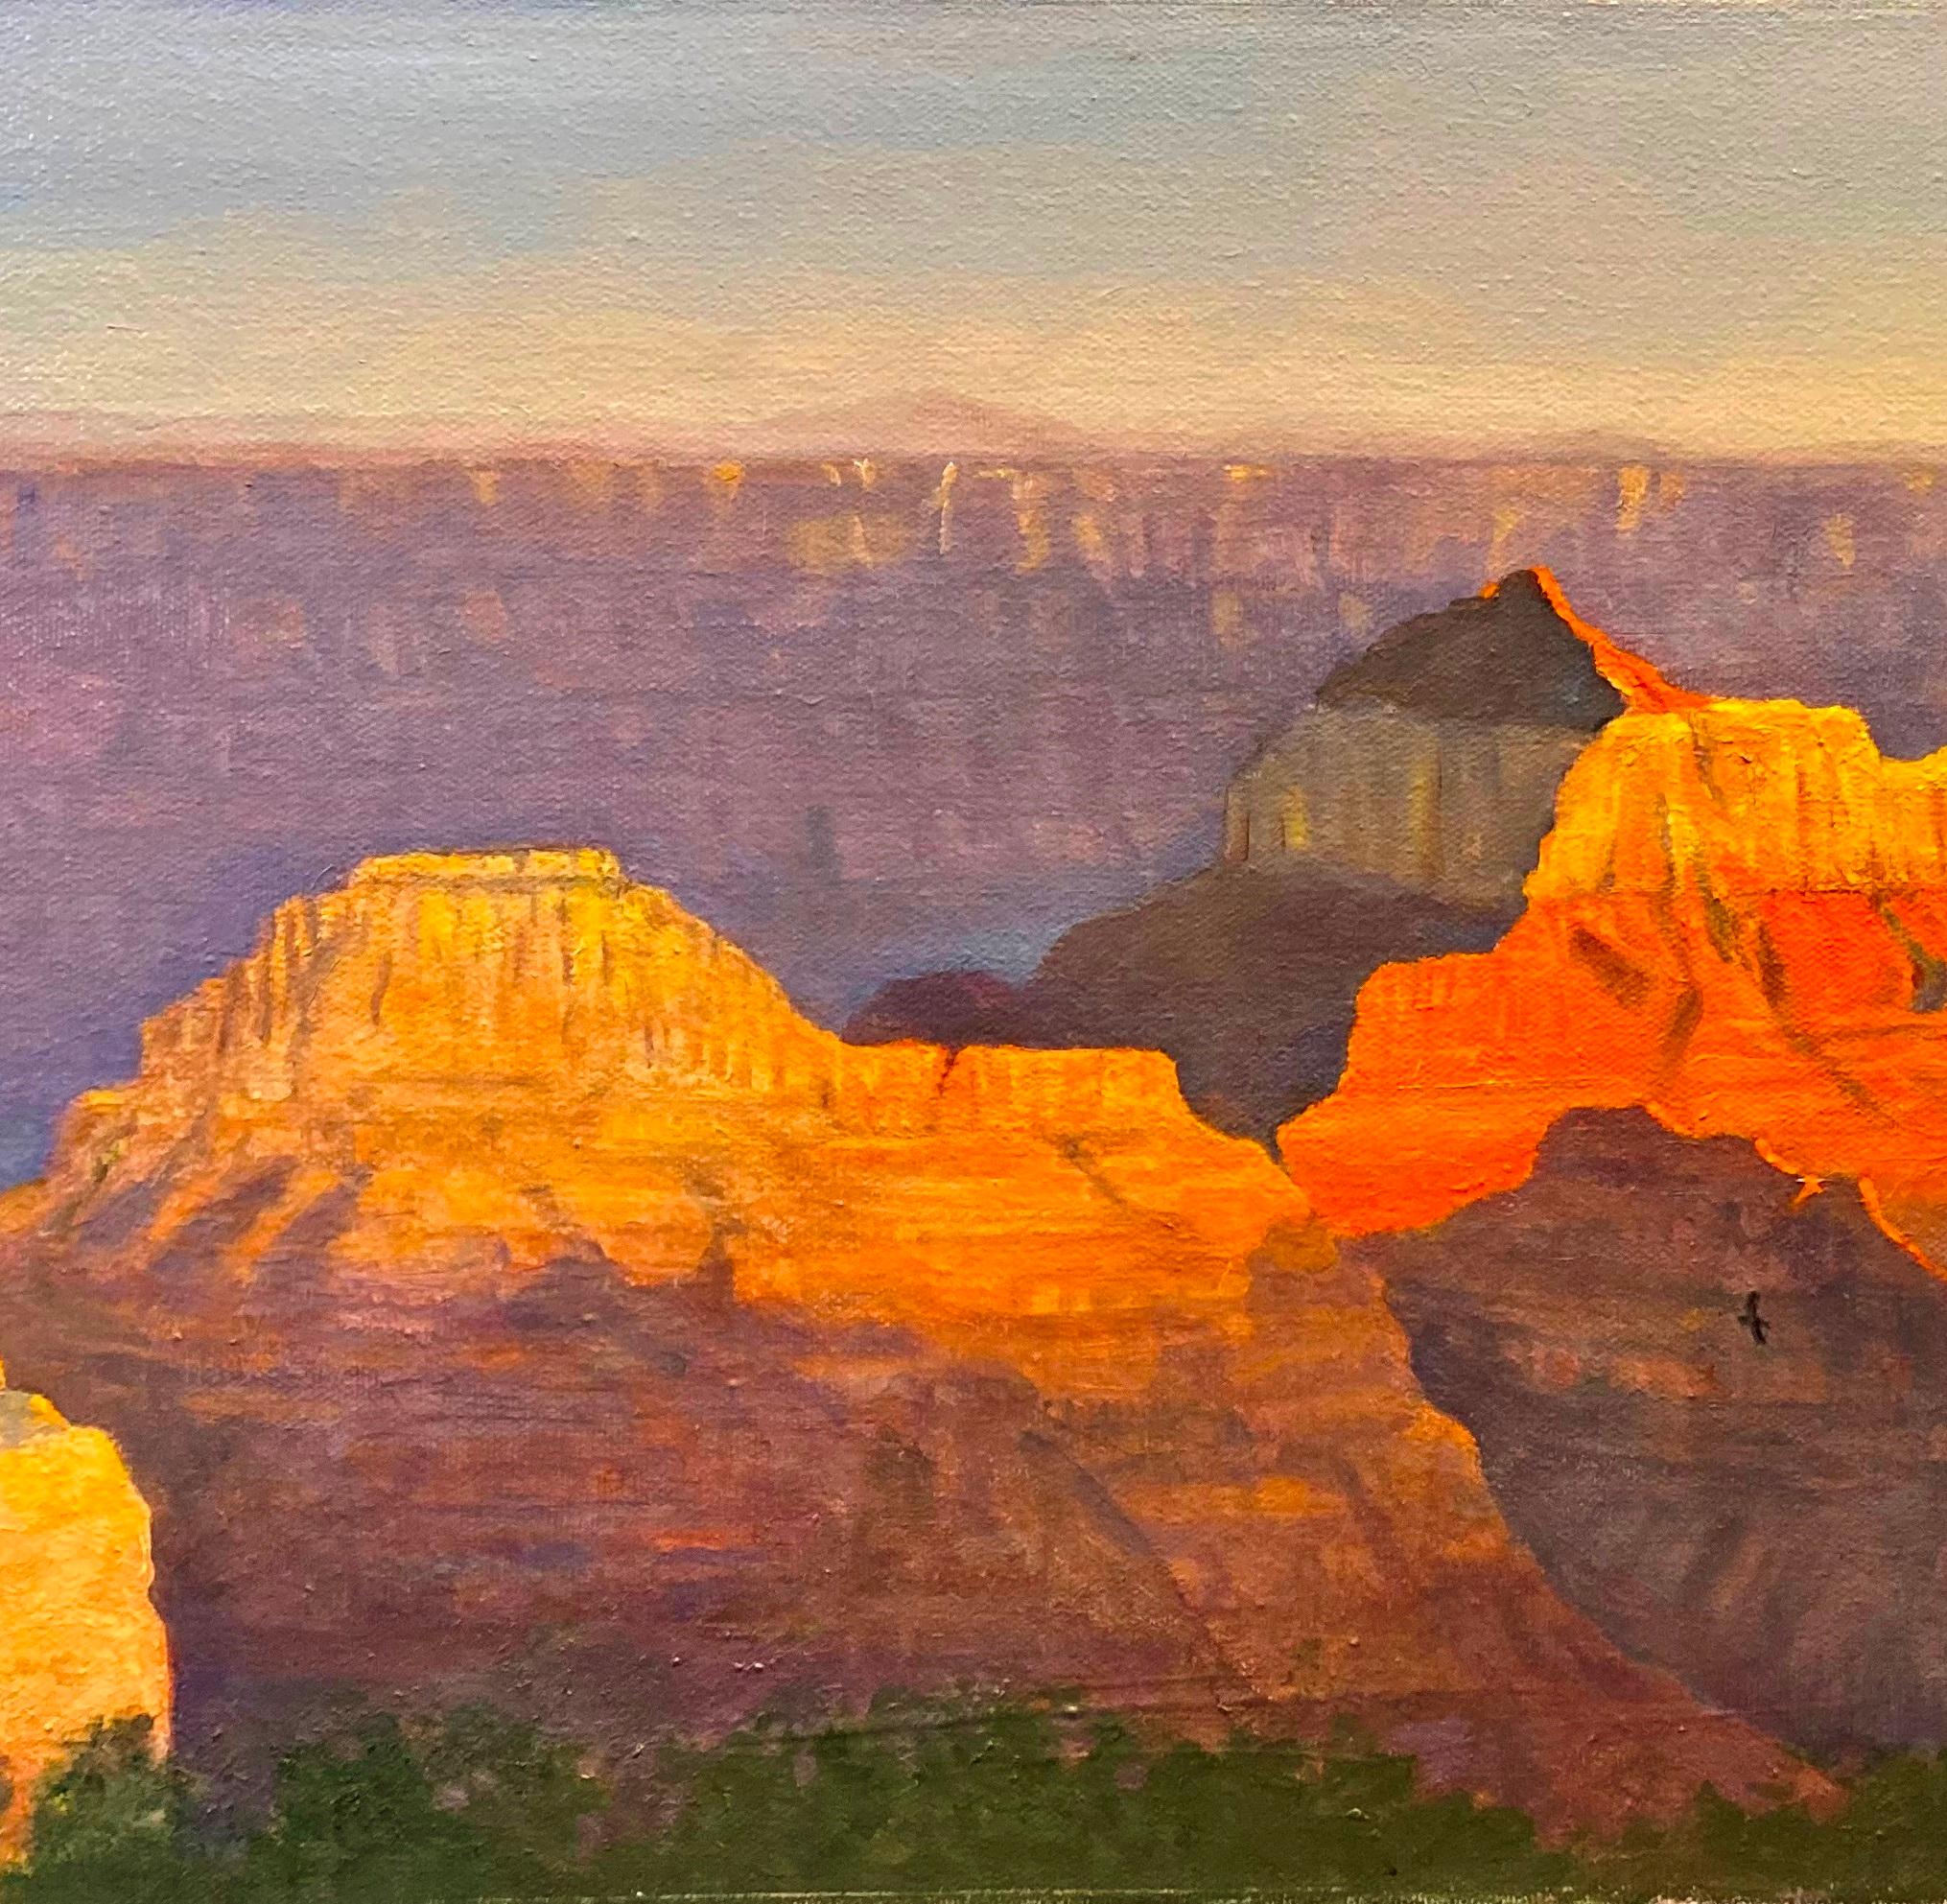 Drama of the Sunset at the Brahma Temple in the Grand Canyon is Awe Inspiring - Realist Painting by Nancy Pellatt